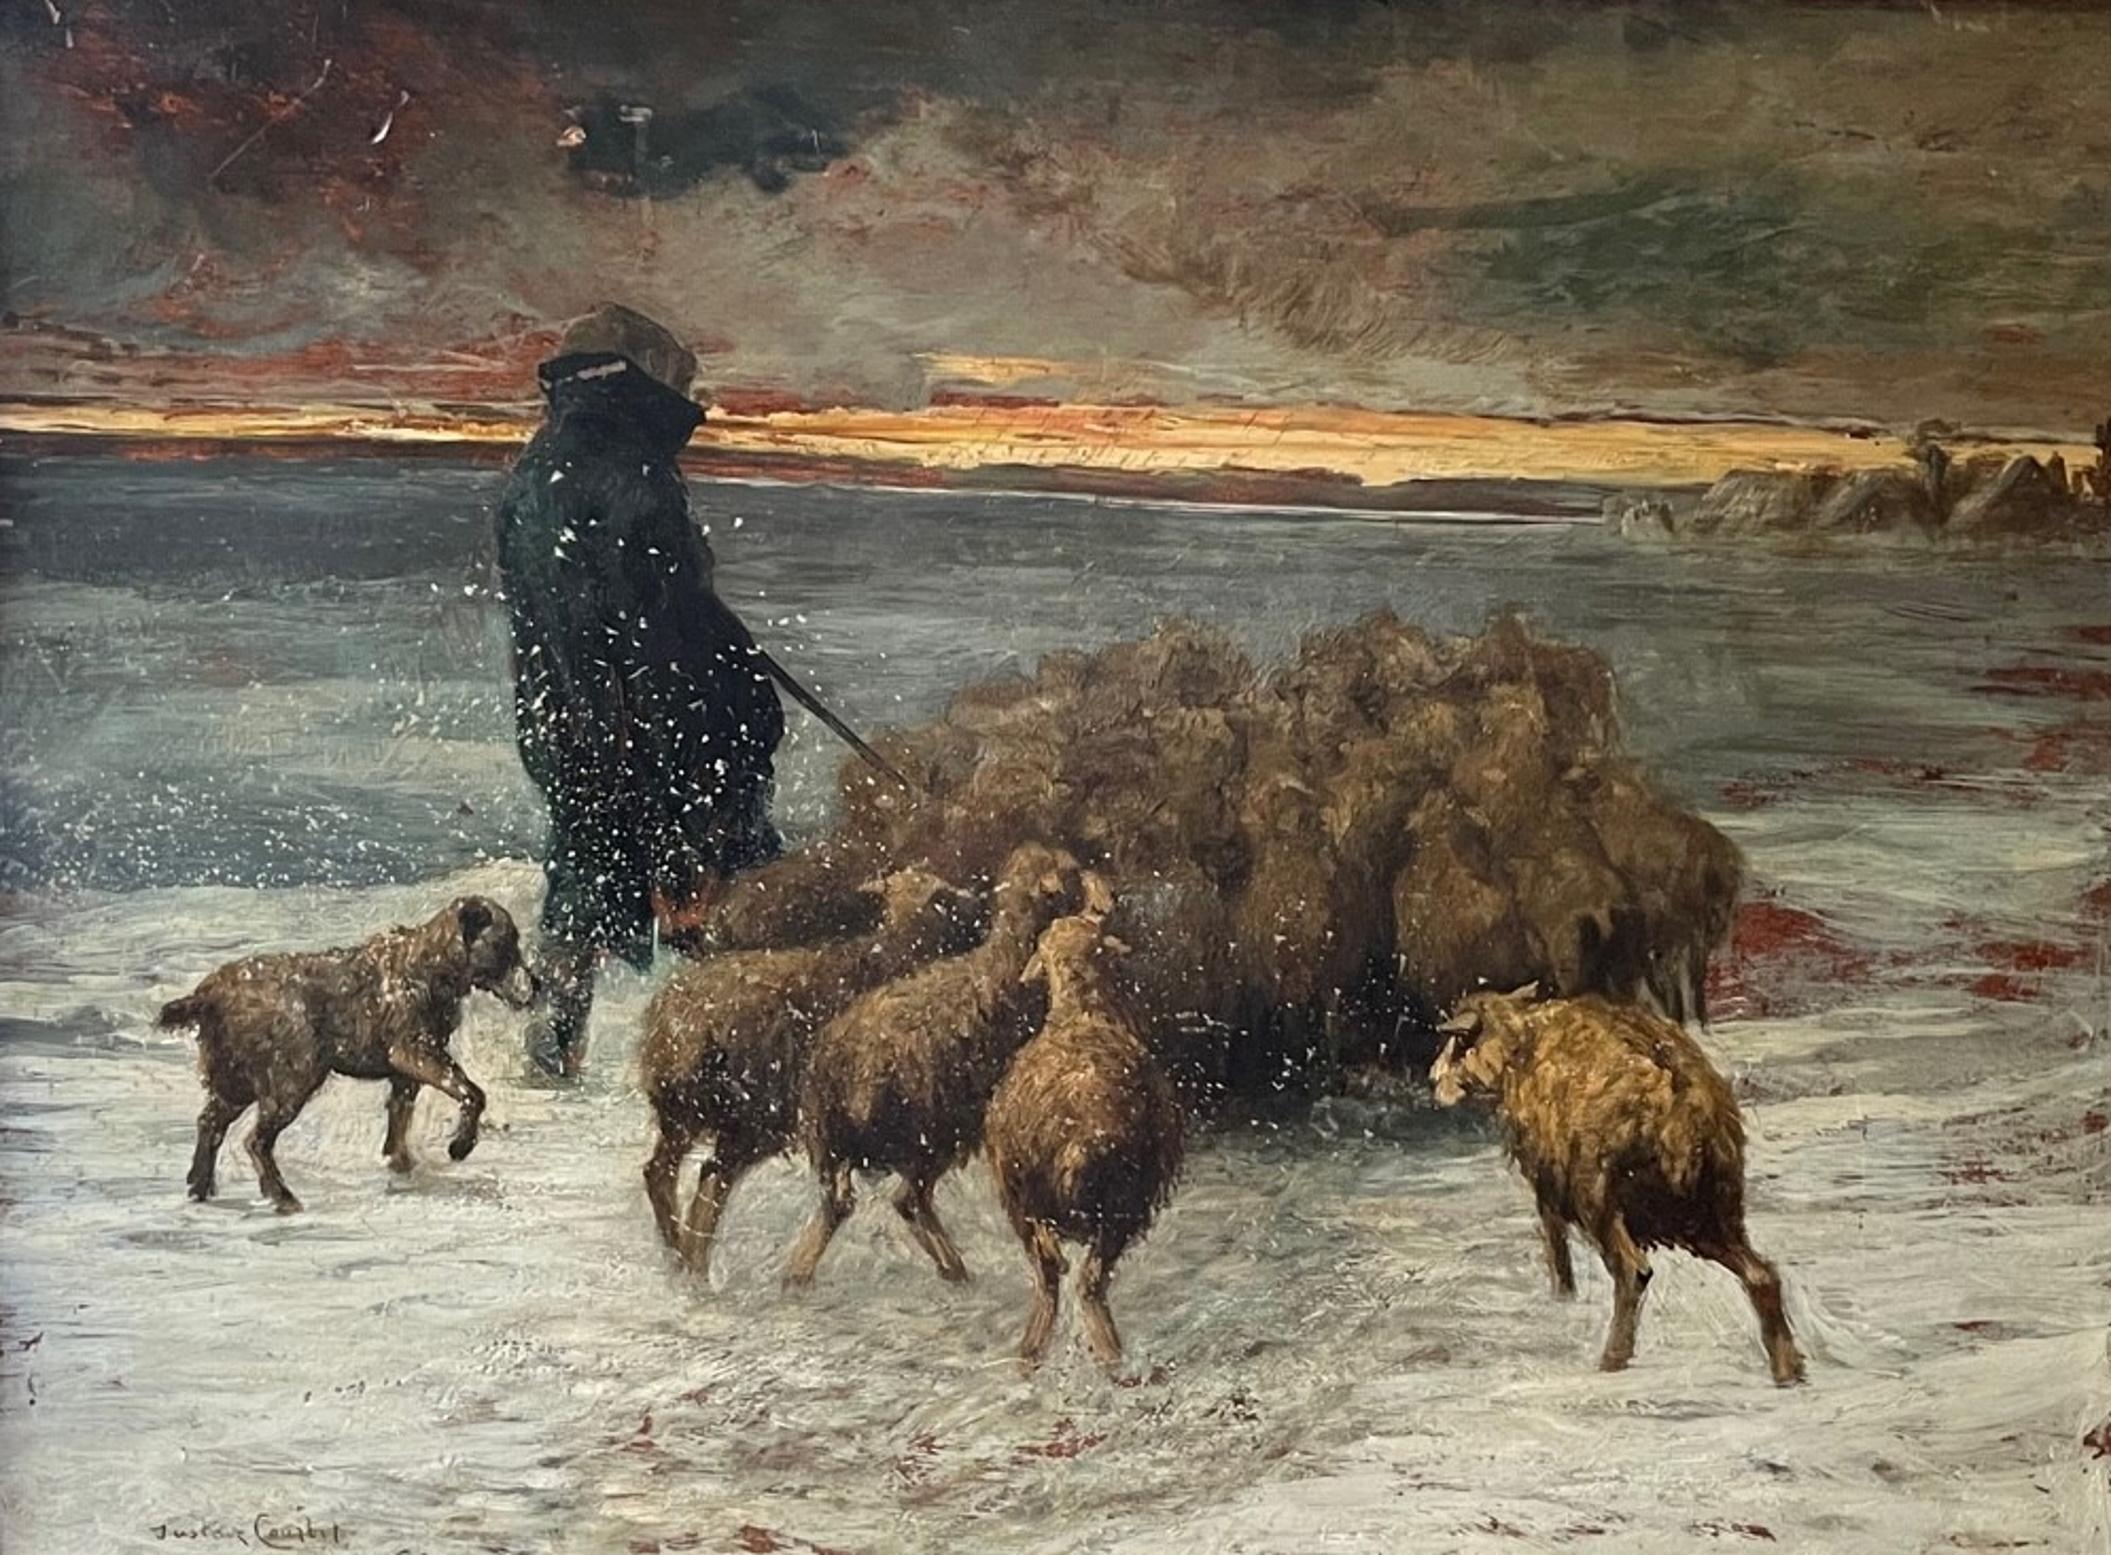 French 19th Century Barbizon Painting “Sheep in Blizzard” signed Gustave Courbet.

Beautiful and moody painting in oil on wood board. It is signed in the lower left, “Gustave Courbet”. We, at Clune Antiques Studio, offer this work as School of